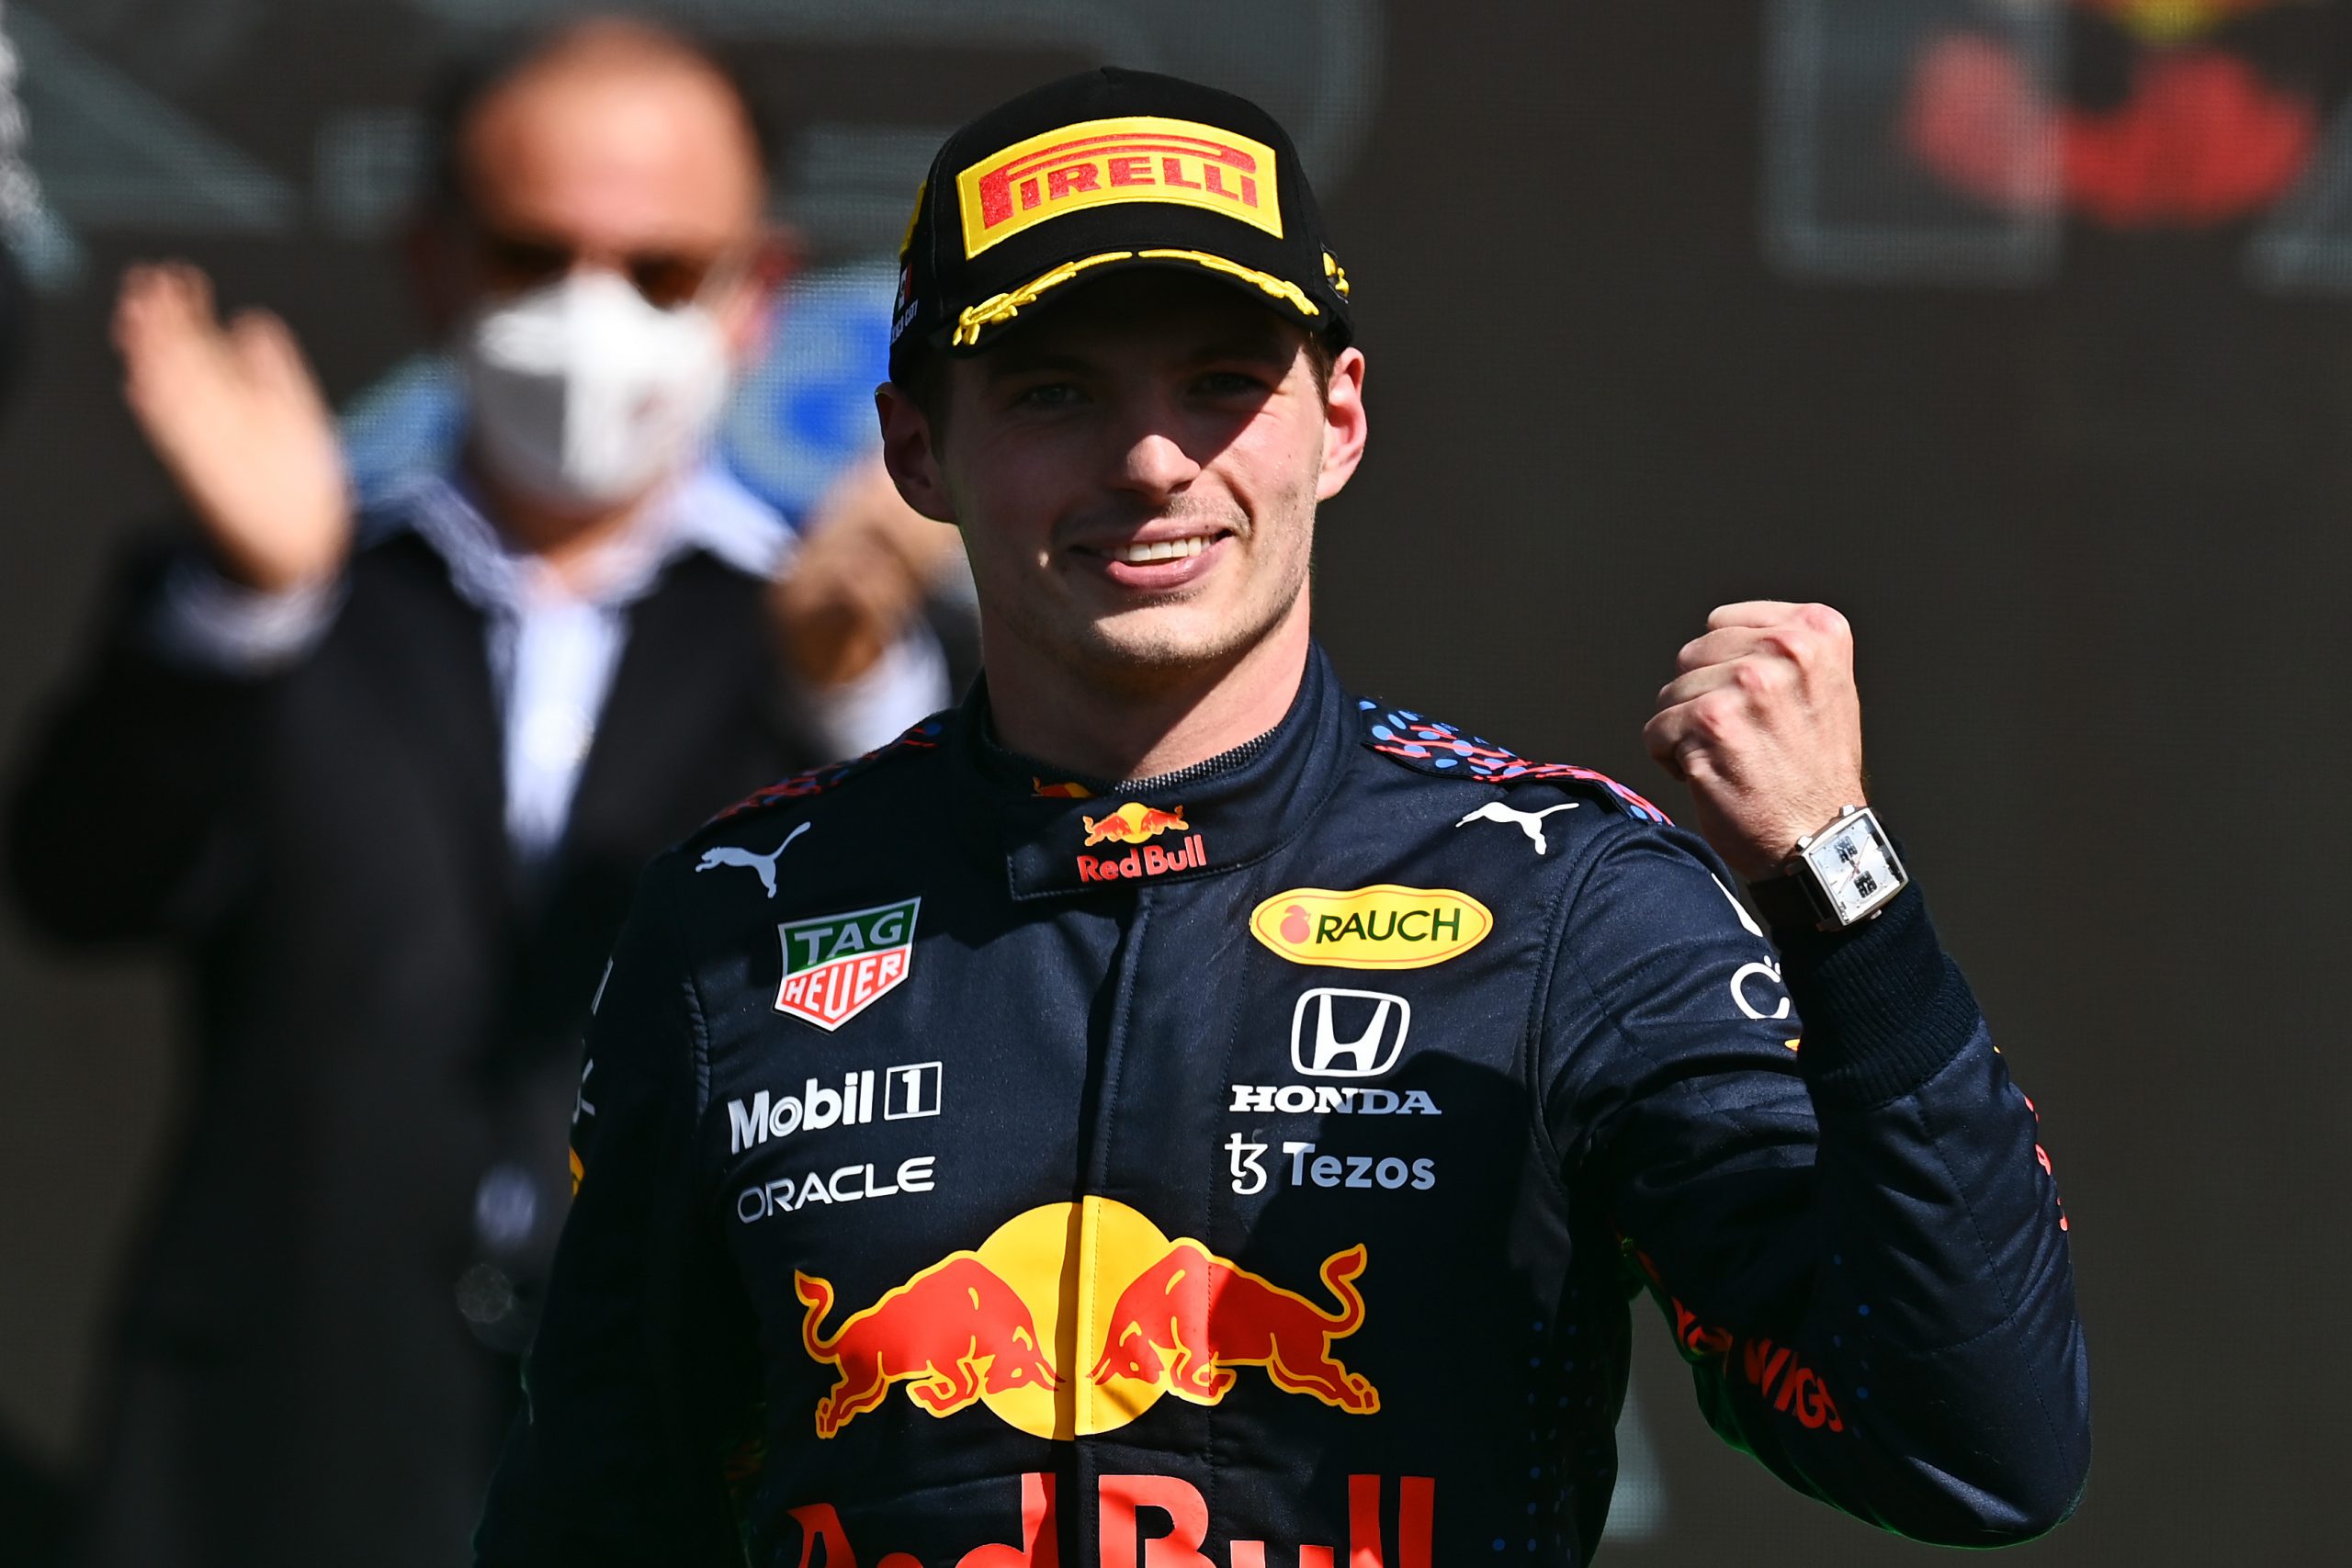 Max Verstappen Comes to Valtteri Bottas’ Defense After Mexico GP Mistakes, Calls Toto Wolff’s Comments ‘Very Cheap’